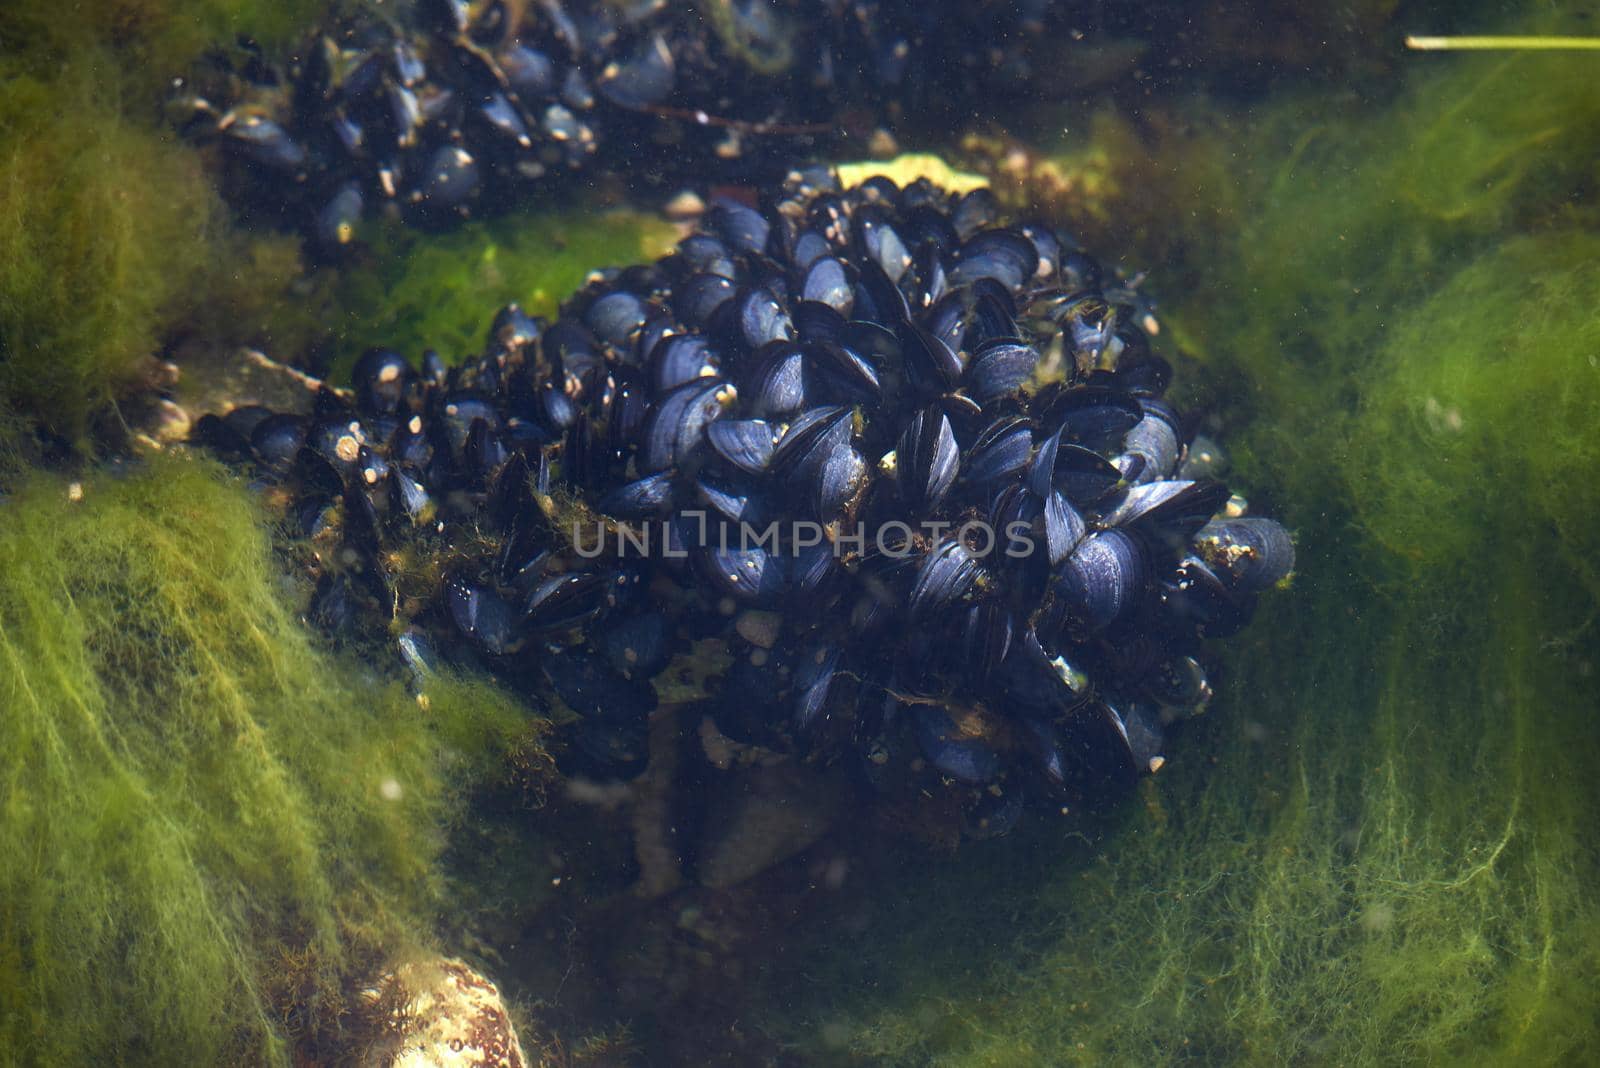 A group of mussels grows in the water of the adriatic sea.